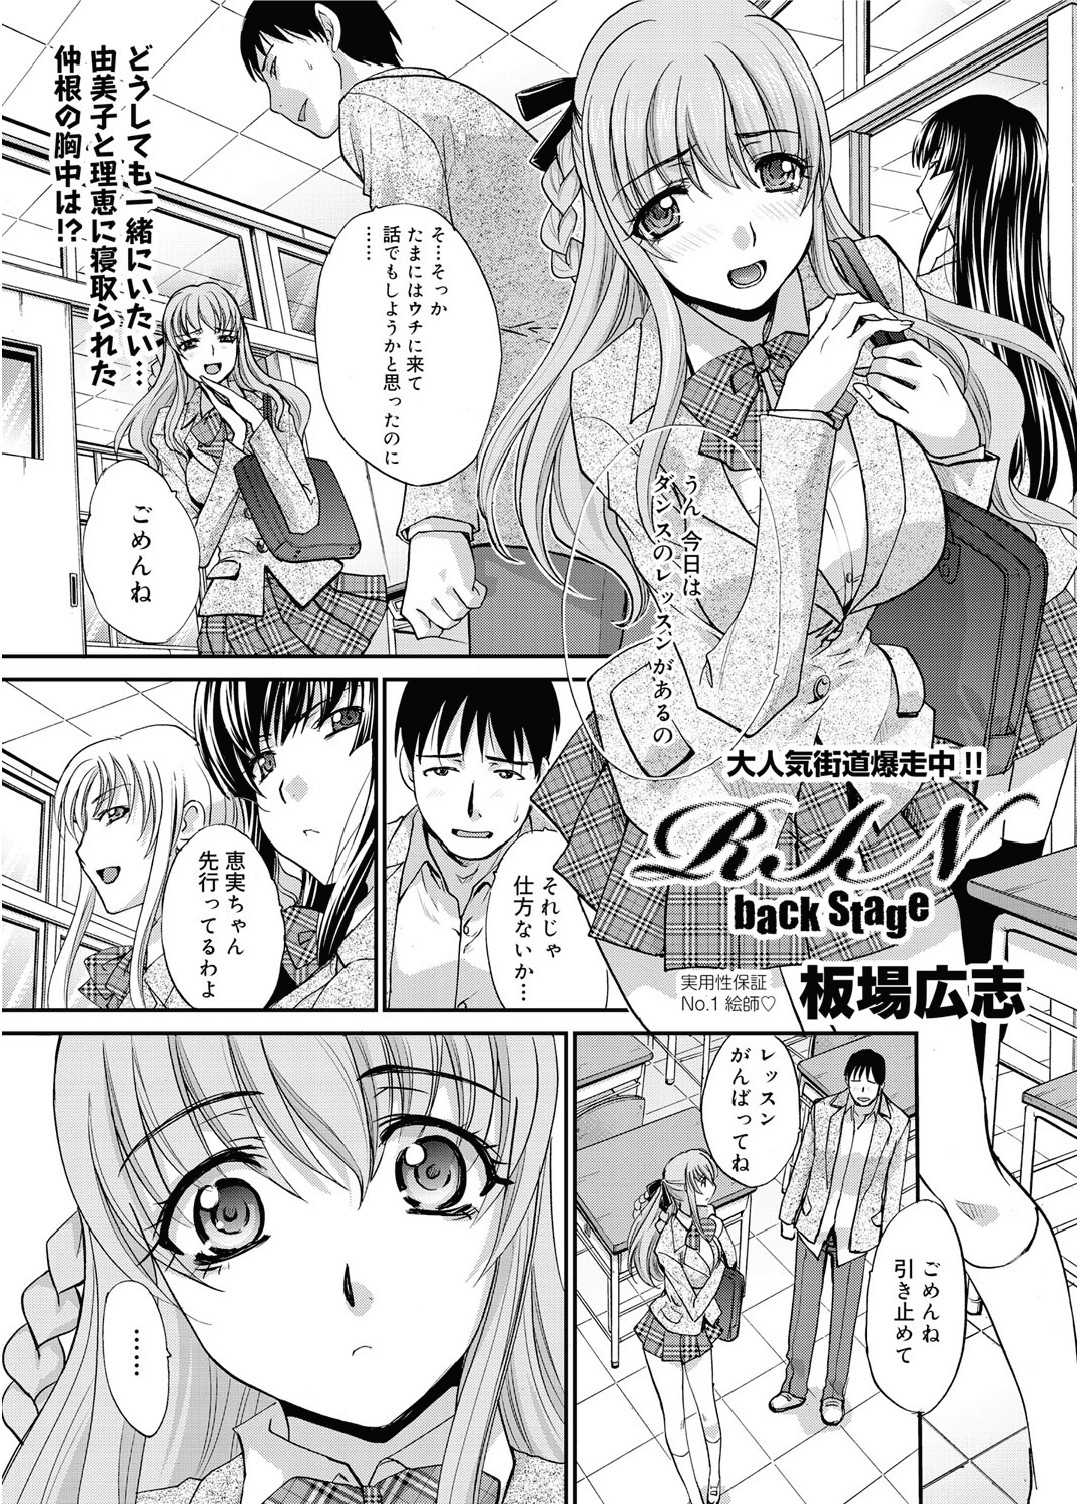 [Itaba Hiroshi] RIN backstage Ch.01-12 (Complete) [板場広志] RIN backstage 全12話